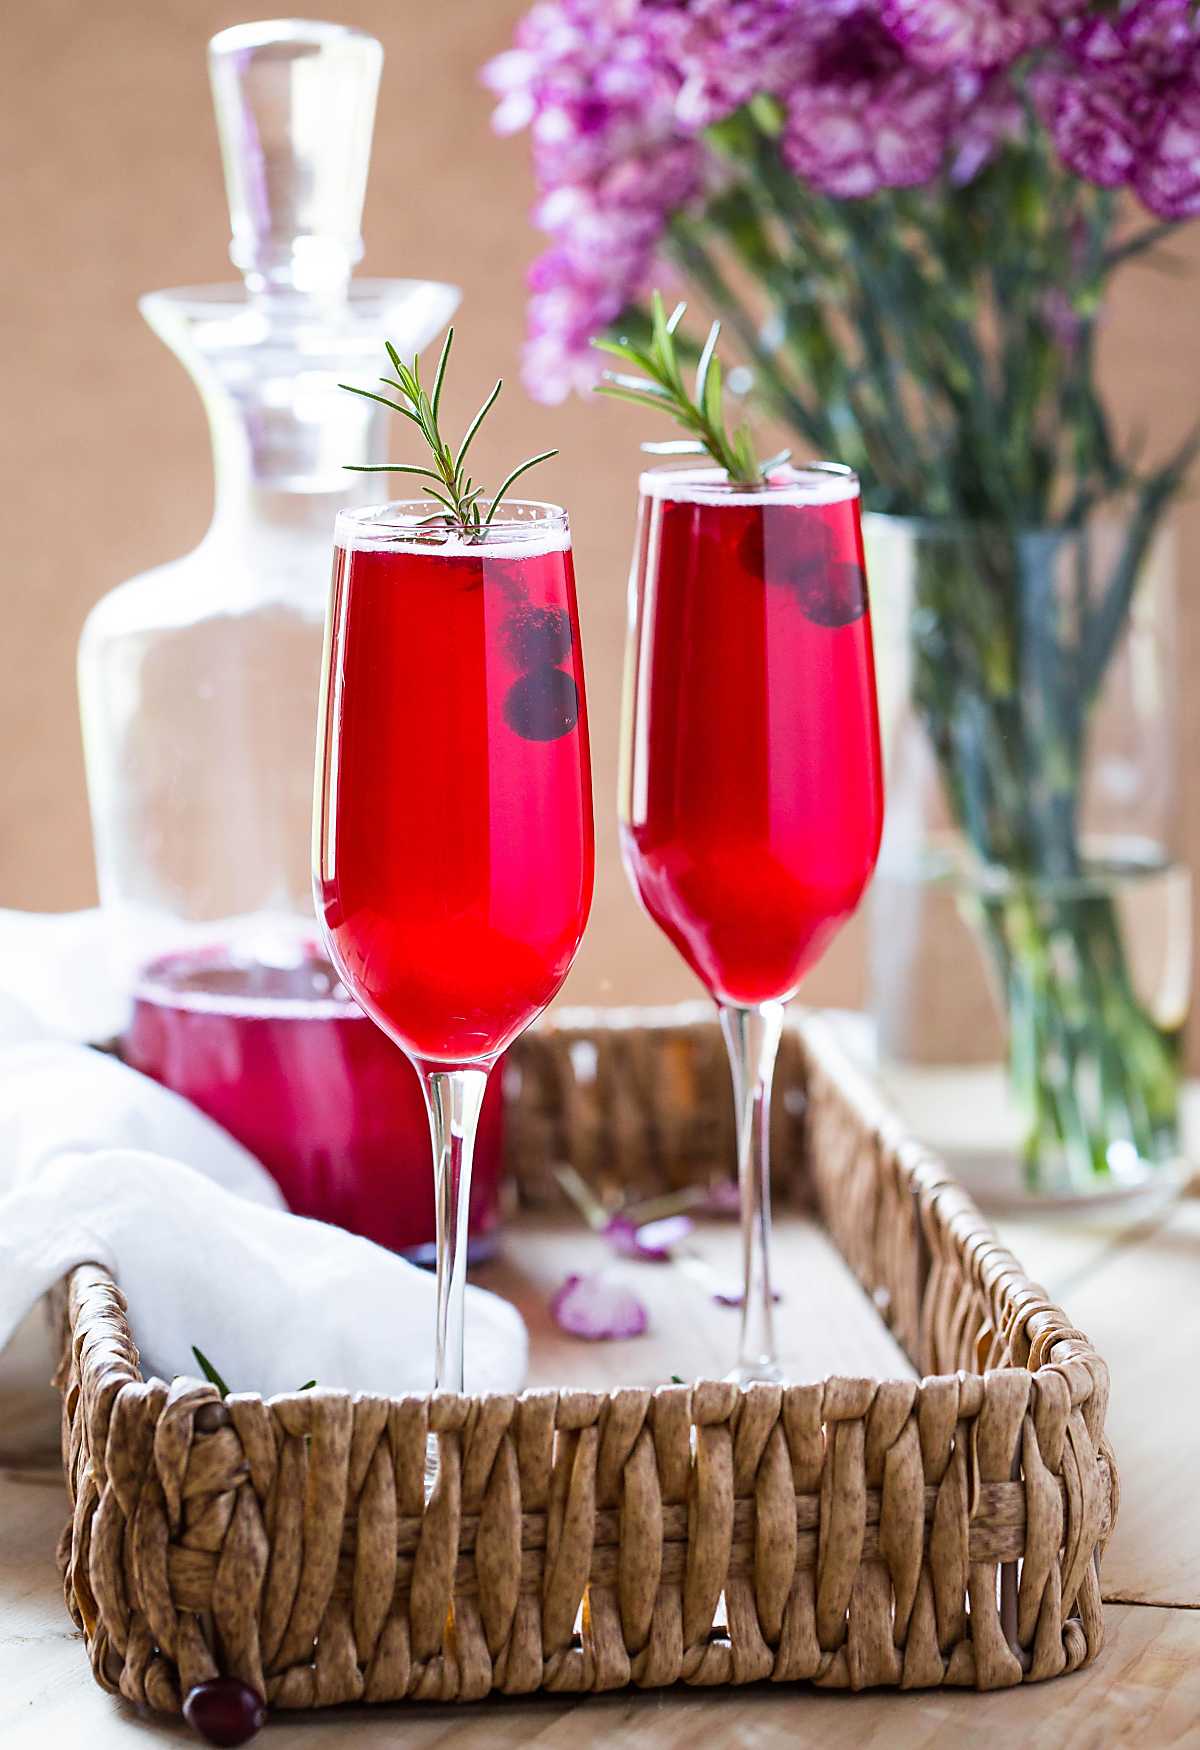 This cranberry mimosa recipe calls for freshly made homemade cranberry juice. It is healthy, naturally sweetened, kids friendly that the entire family can enjoy. | #nonalcoholic #cranberry #mimosa #thanksgivingdrinks 